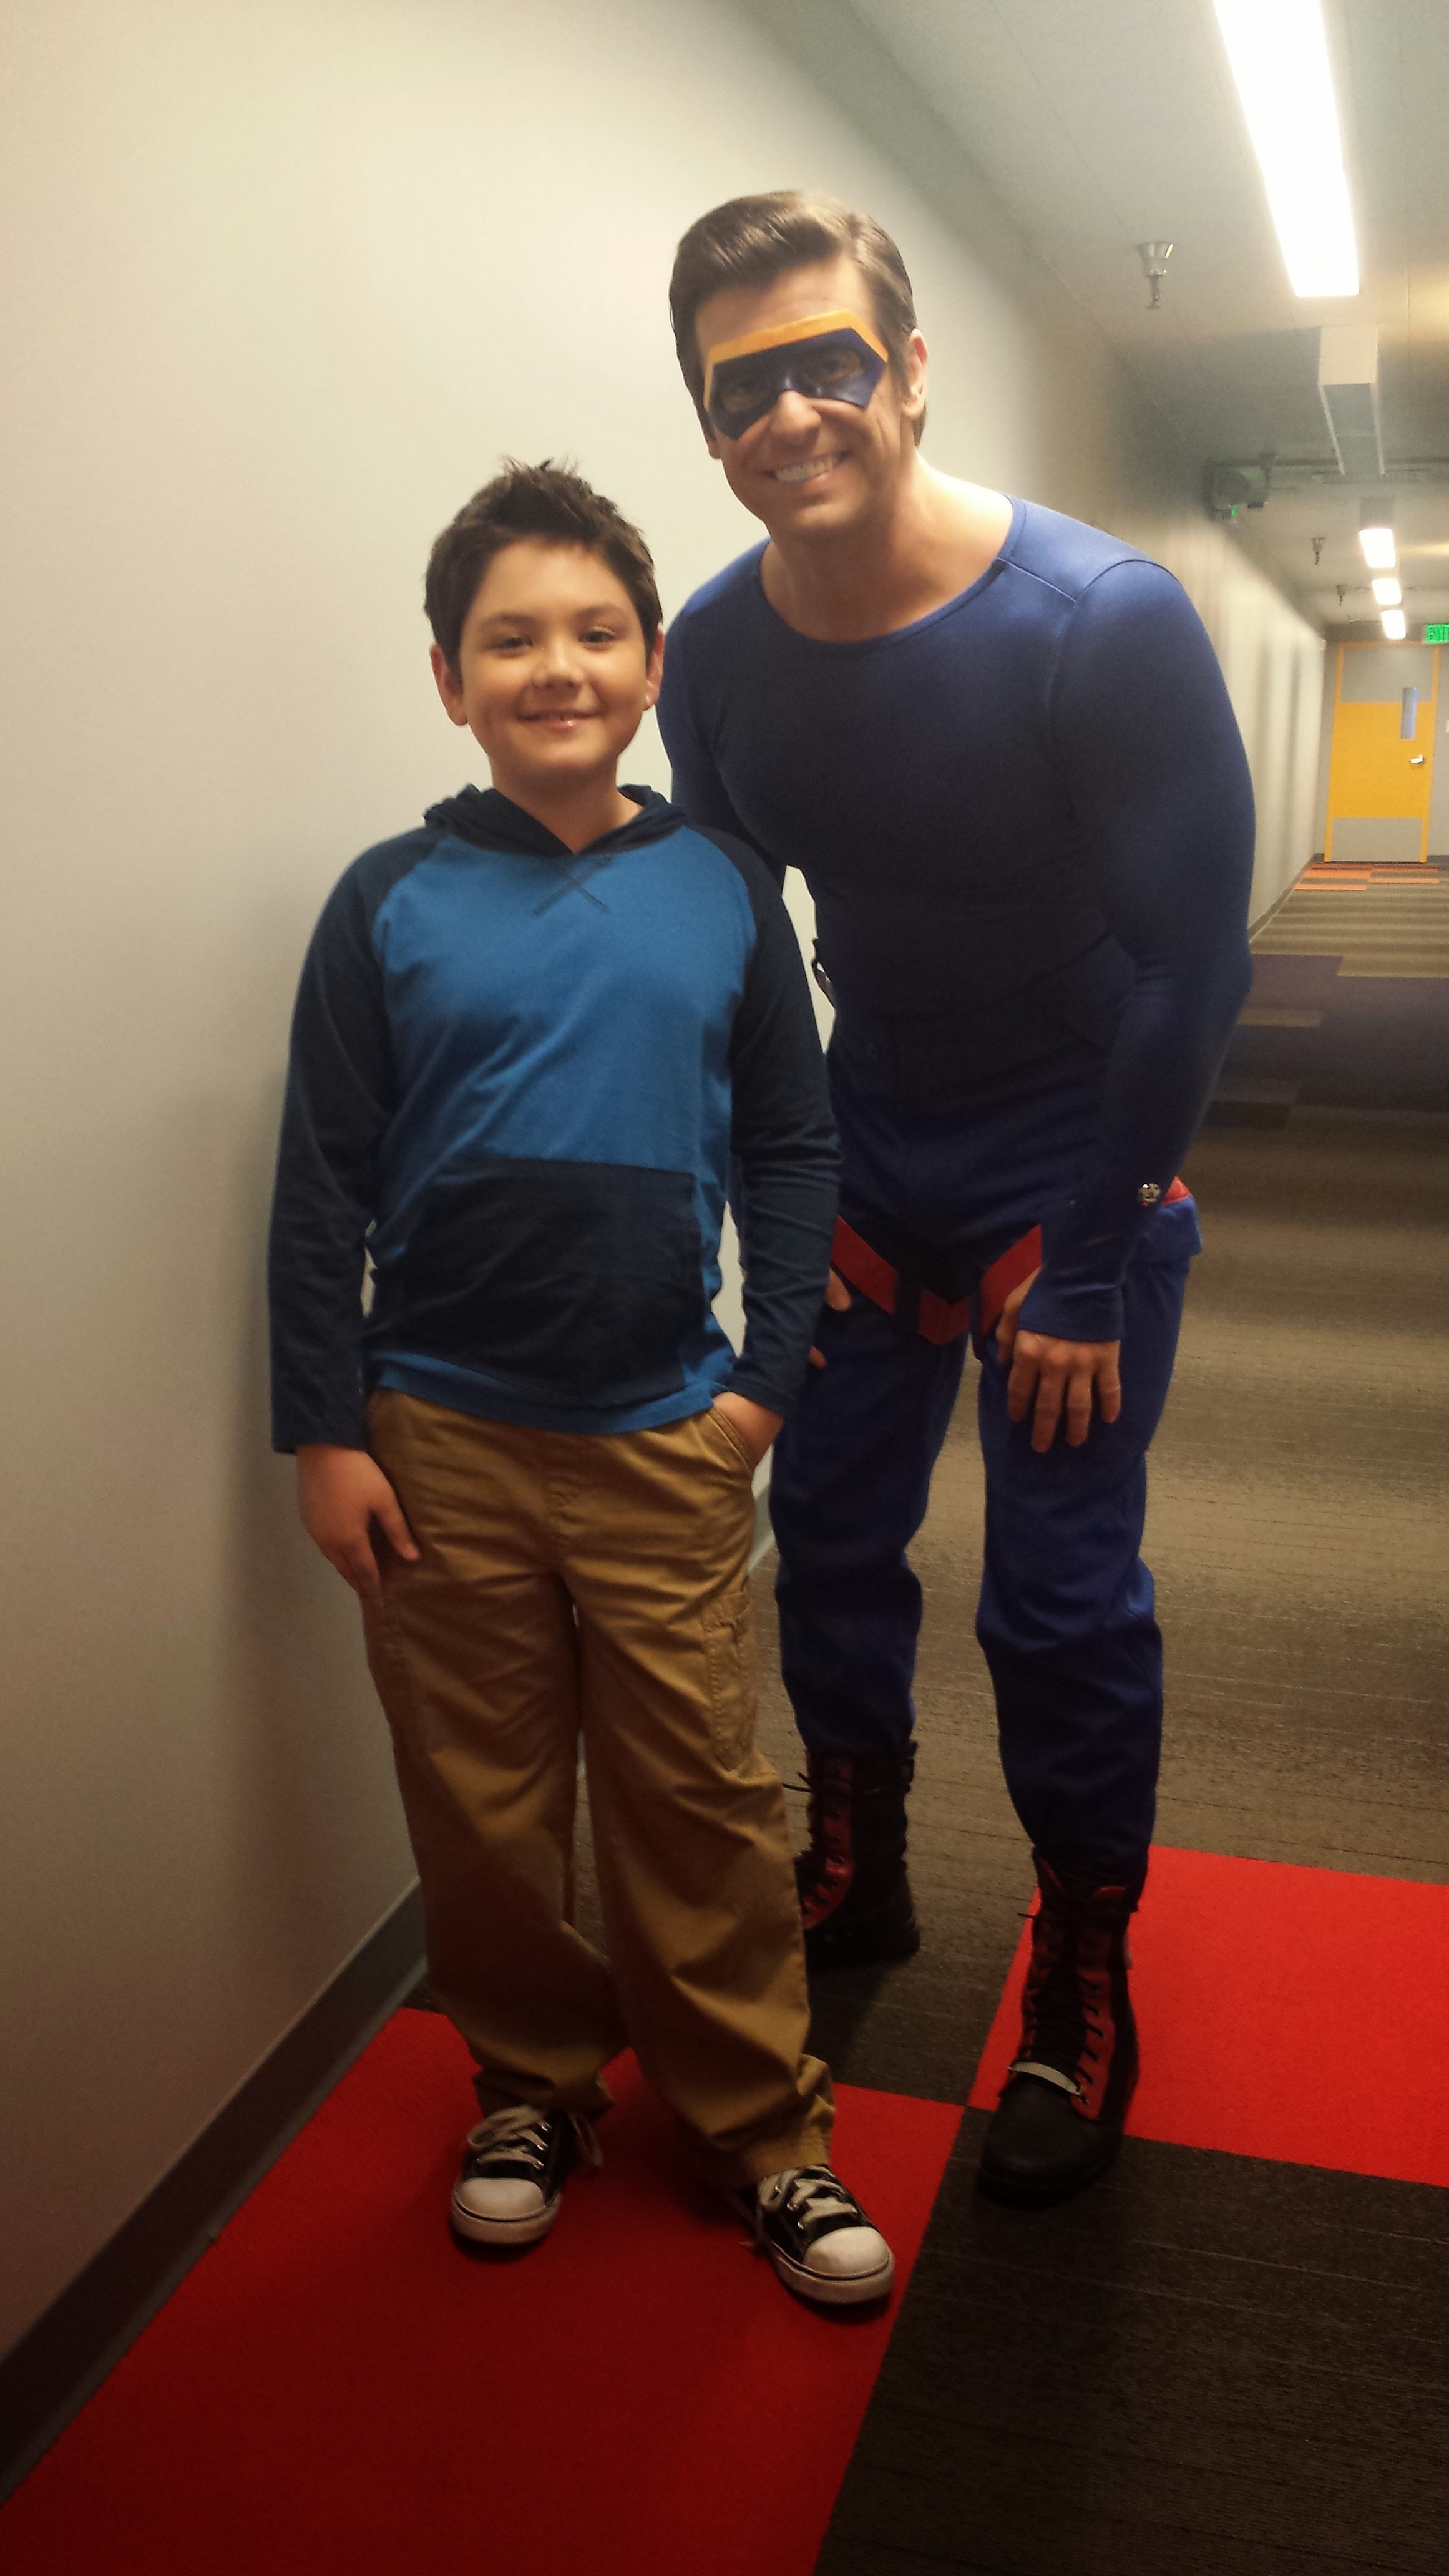 Mason played Max on Henry Danger